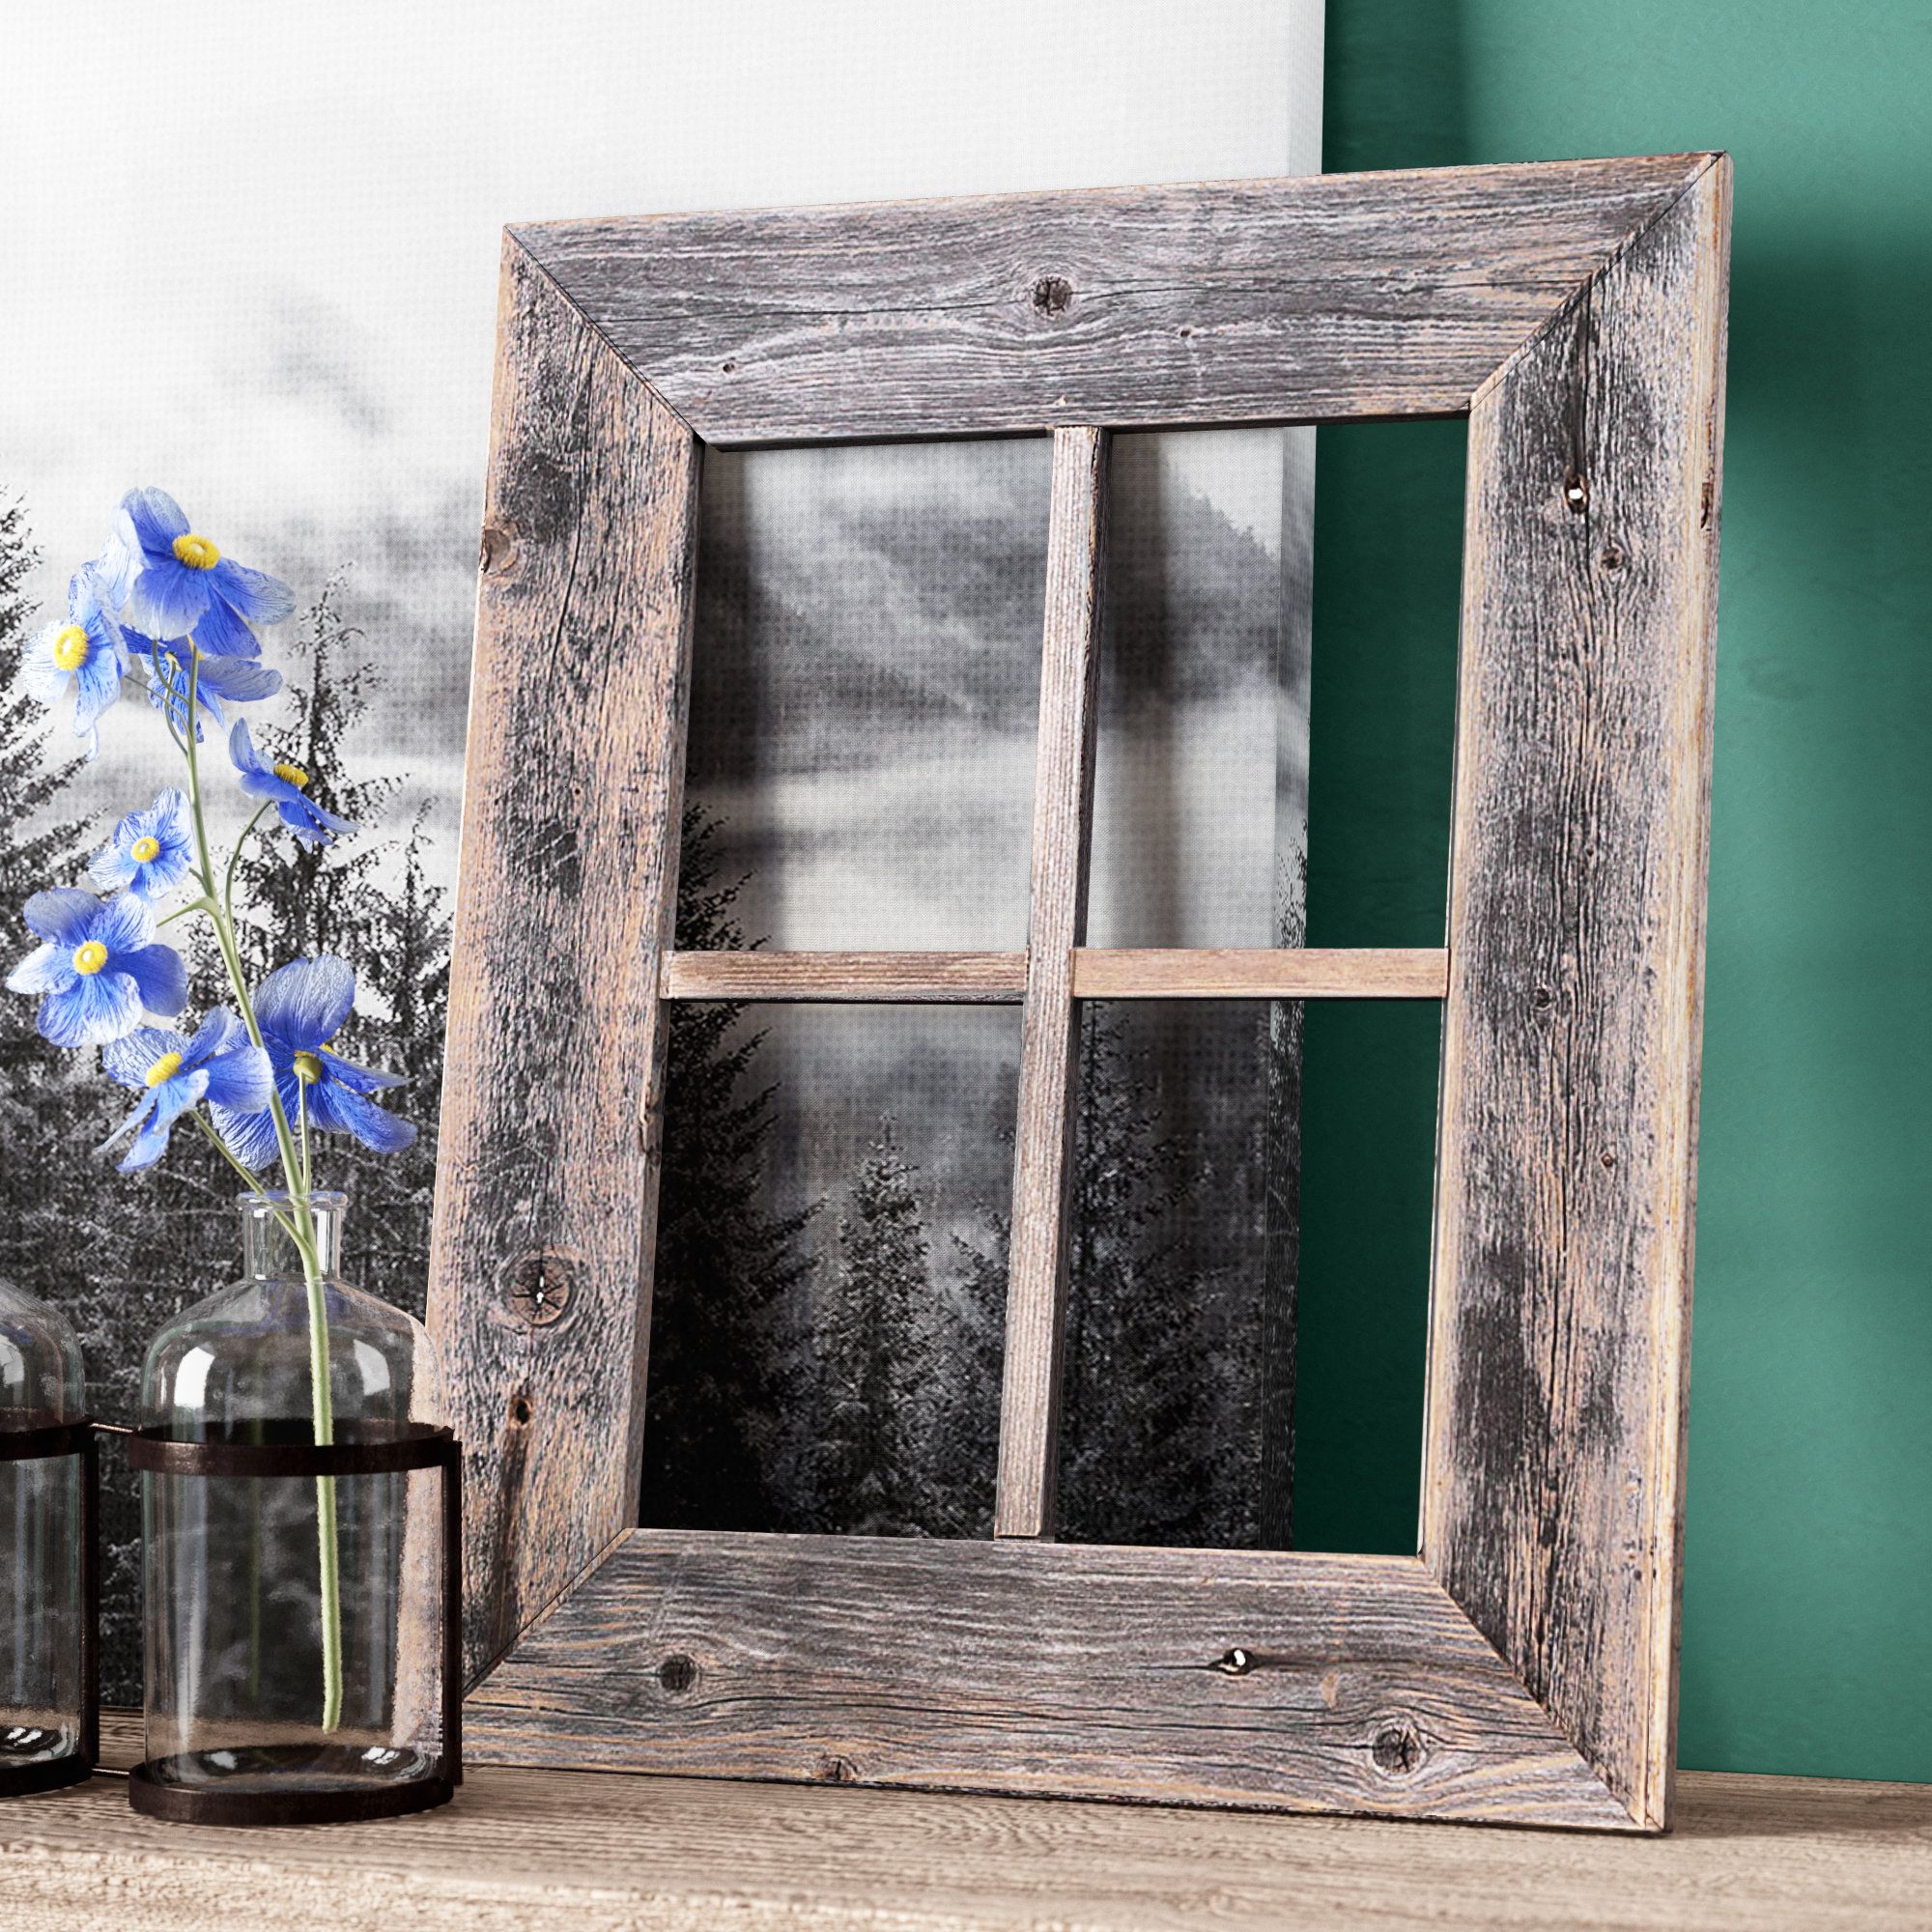 Union Rustic Old Rustic Barn Window Frame Wall Décor Intended For Old Rustic Barn Window Frame (View 1 of 30)